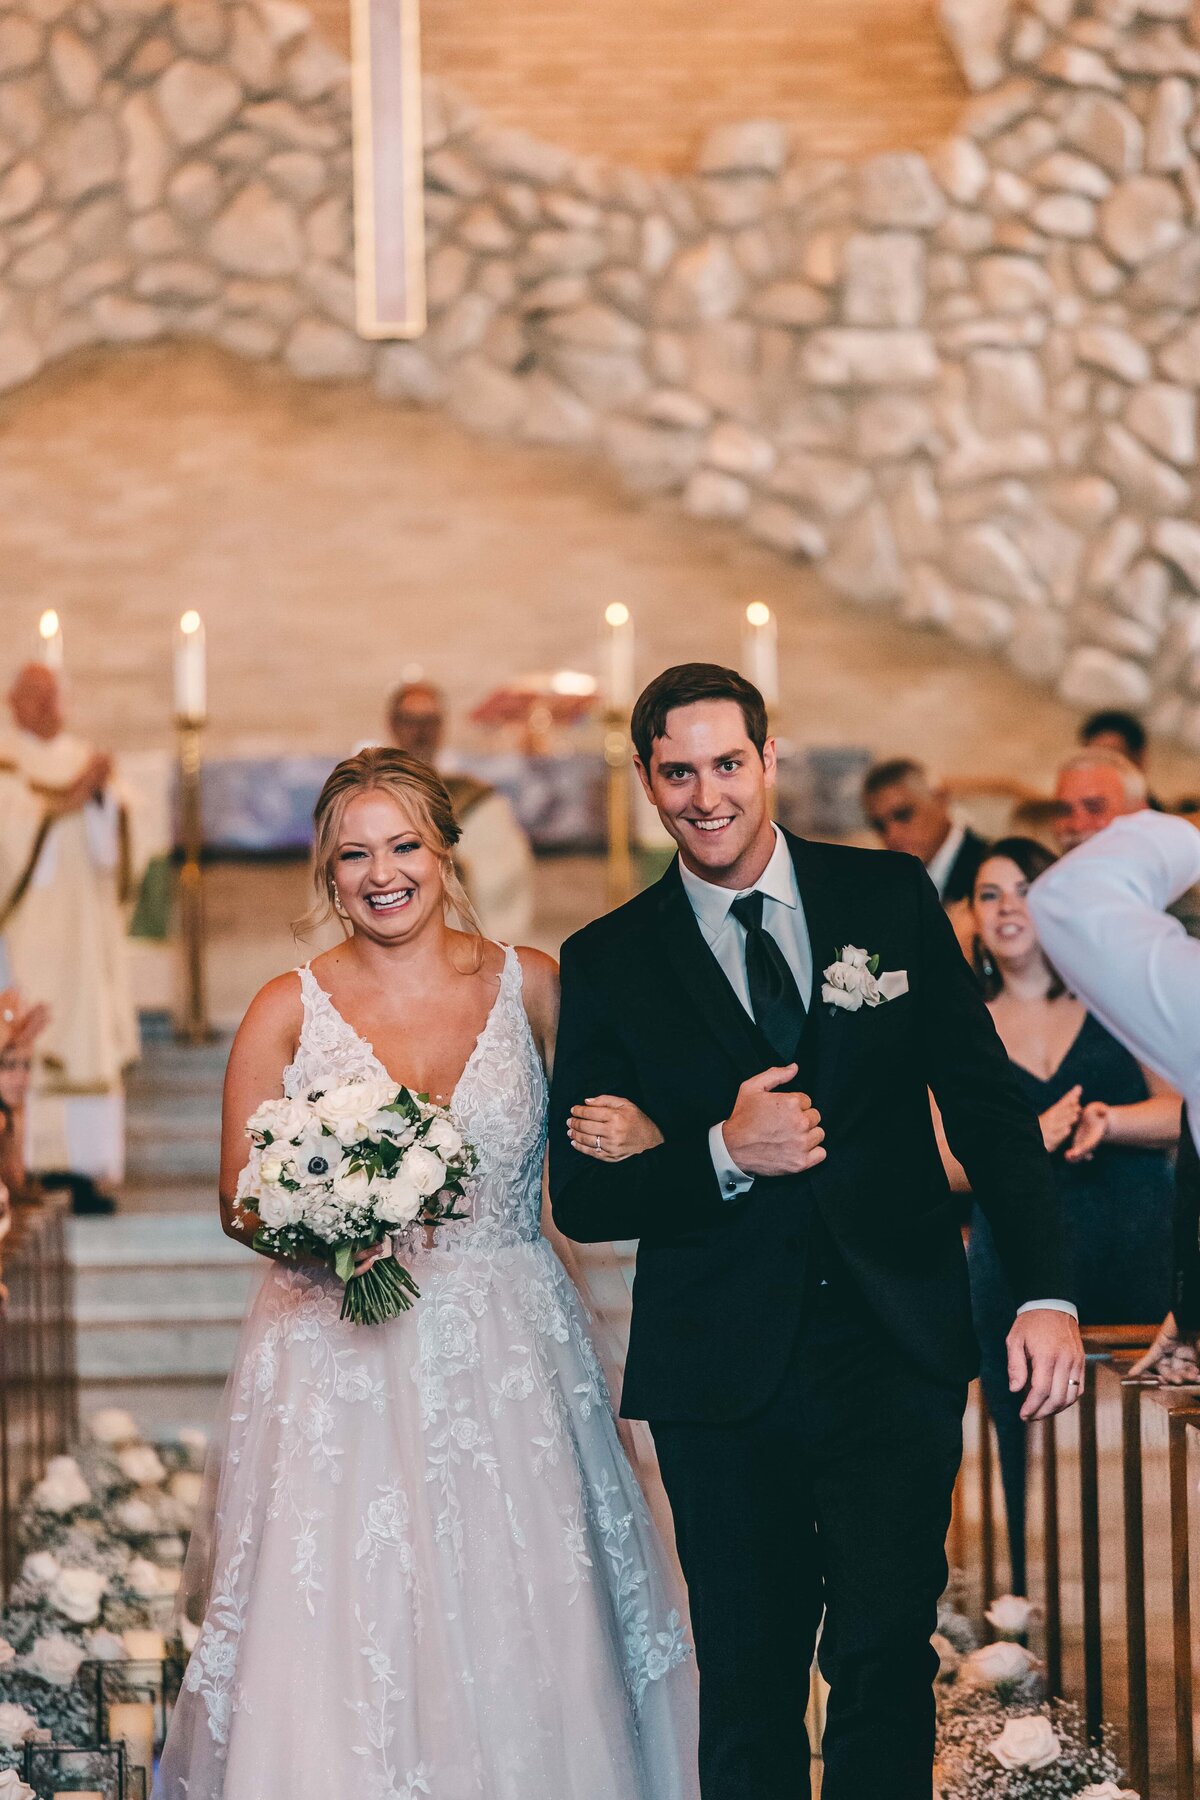 A joyful bride and groom walking down the aisle at a park farm winery wedding, smiling broadly, with the bride holding a bouquet and the groom in a black suit.